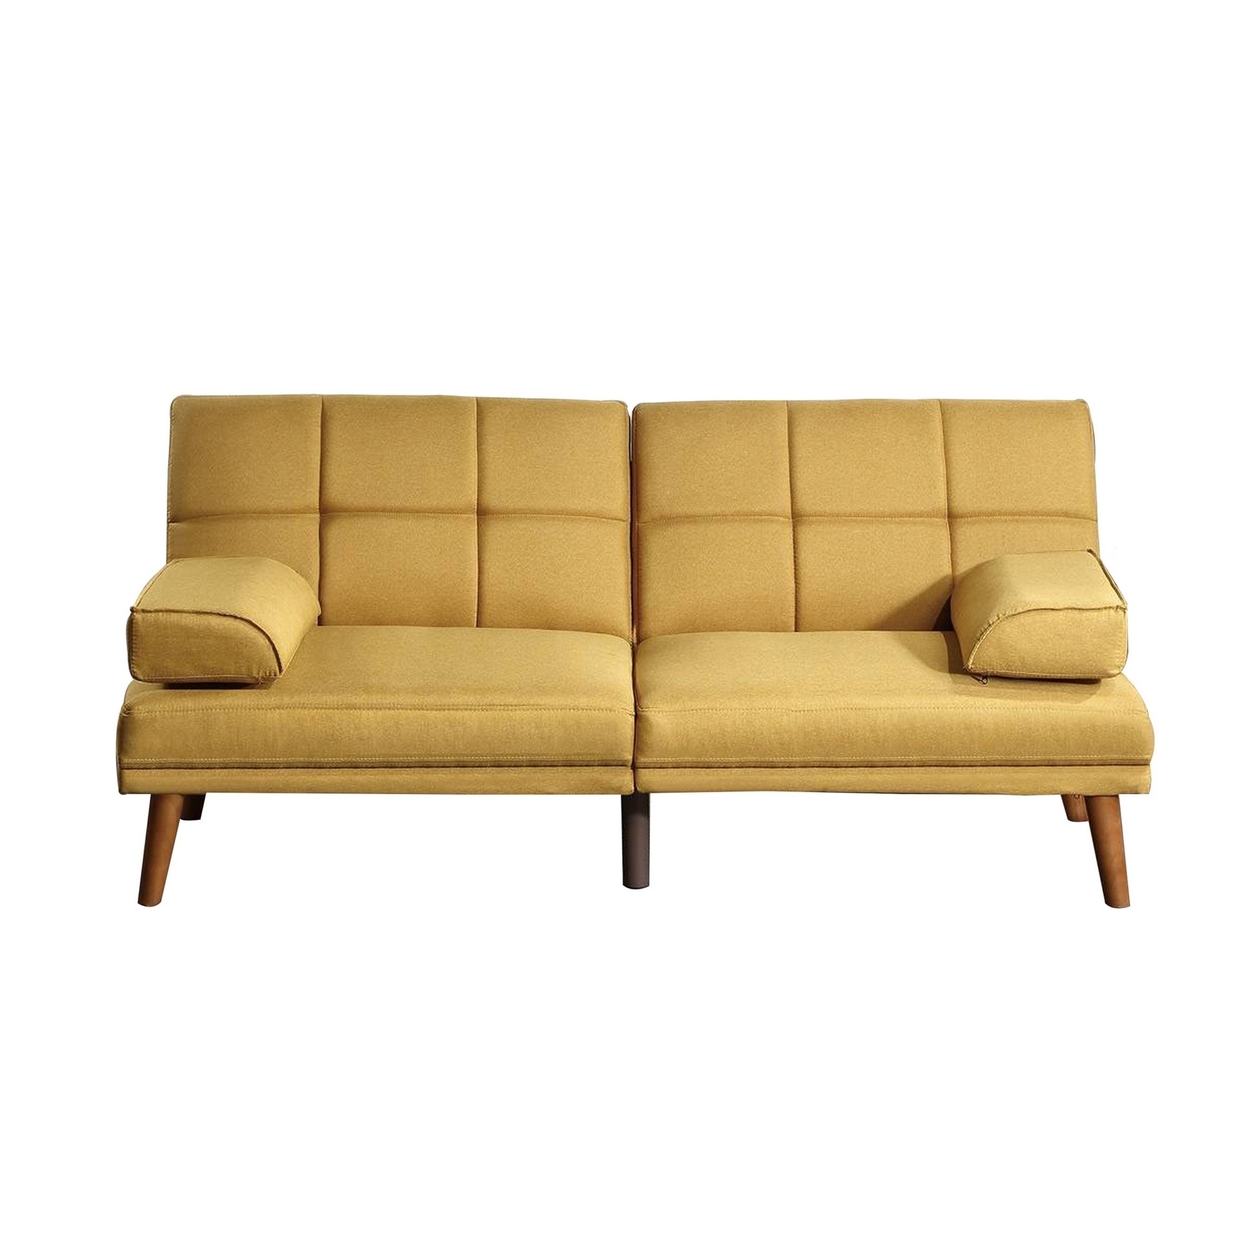 Gina 71 Inch Adjustable Futon Sofa Bed, Tufted, Tapered Legs, Mustard